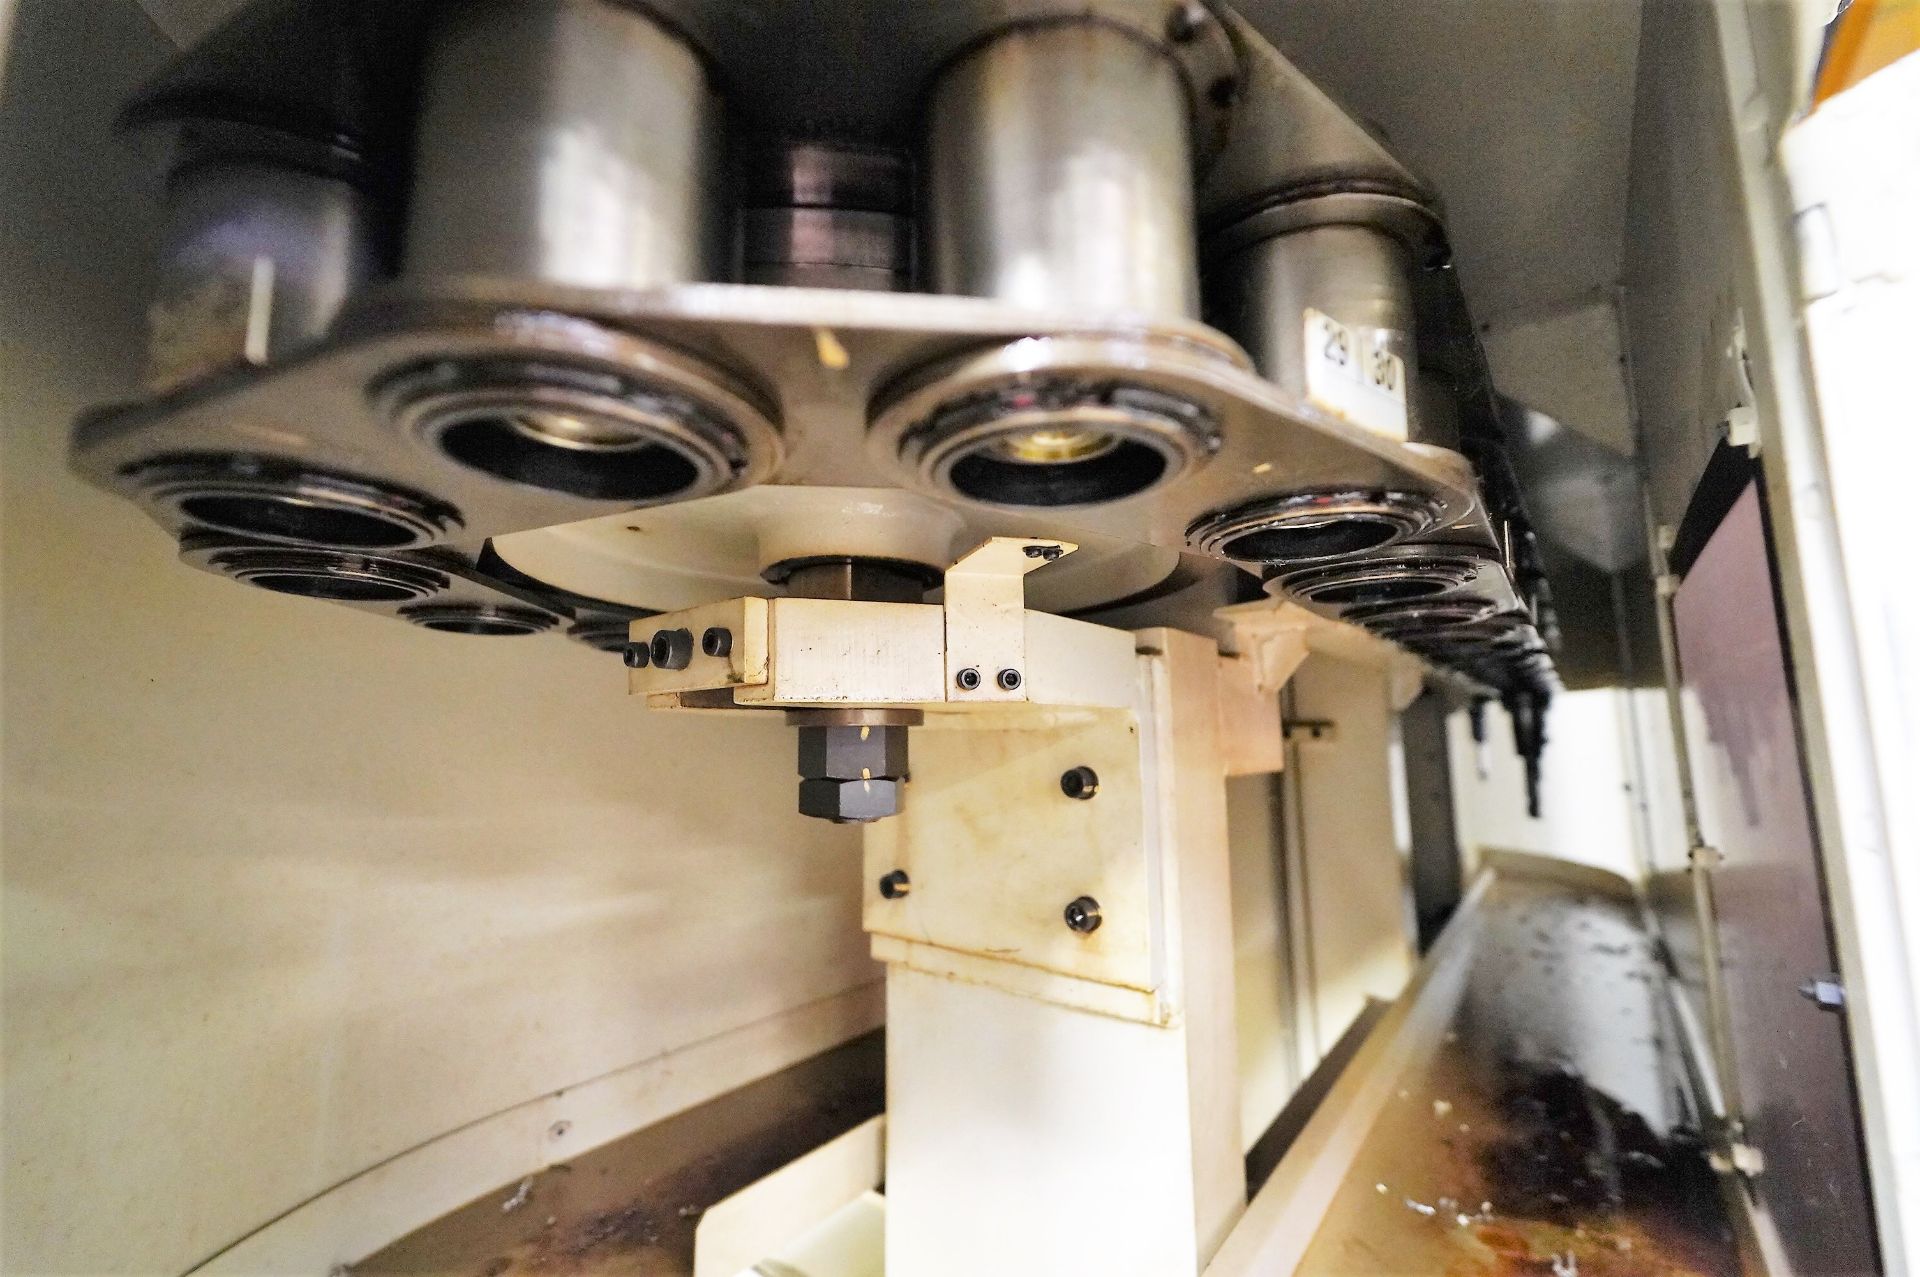 SNK HPS-120B 5-Axis CNC High Speed Aerospace Profiler & Machining Center With Pallet Changer - Image 12 of 20